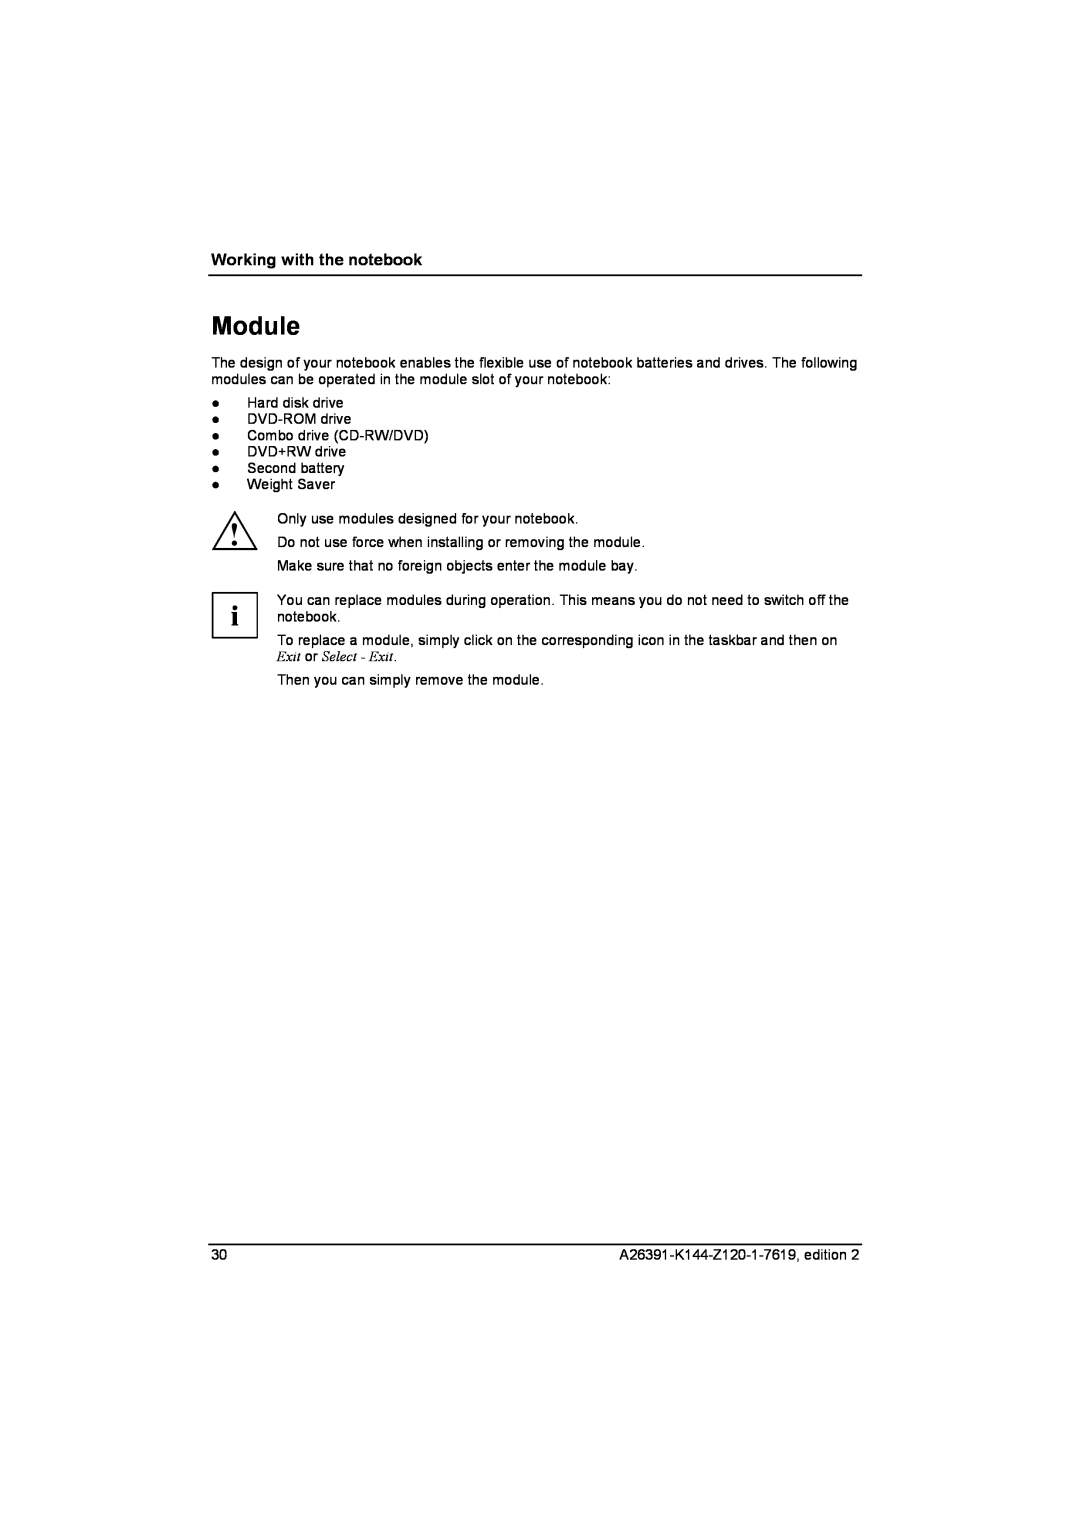 Fujitsu S SERIES manual Module, Working with the notebook 